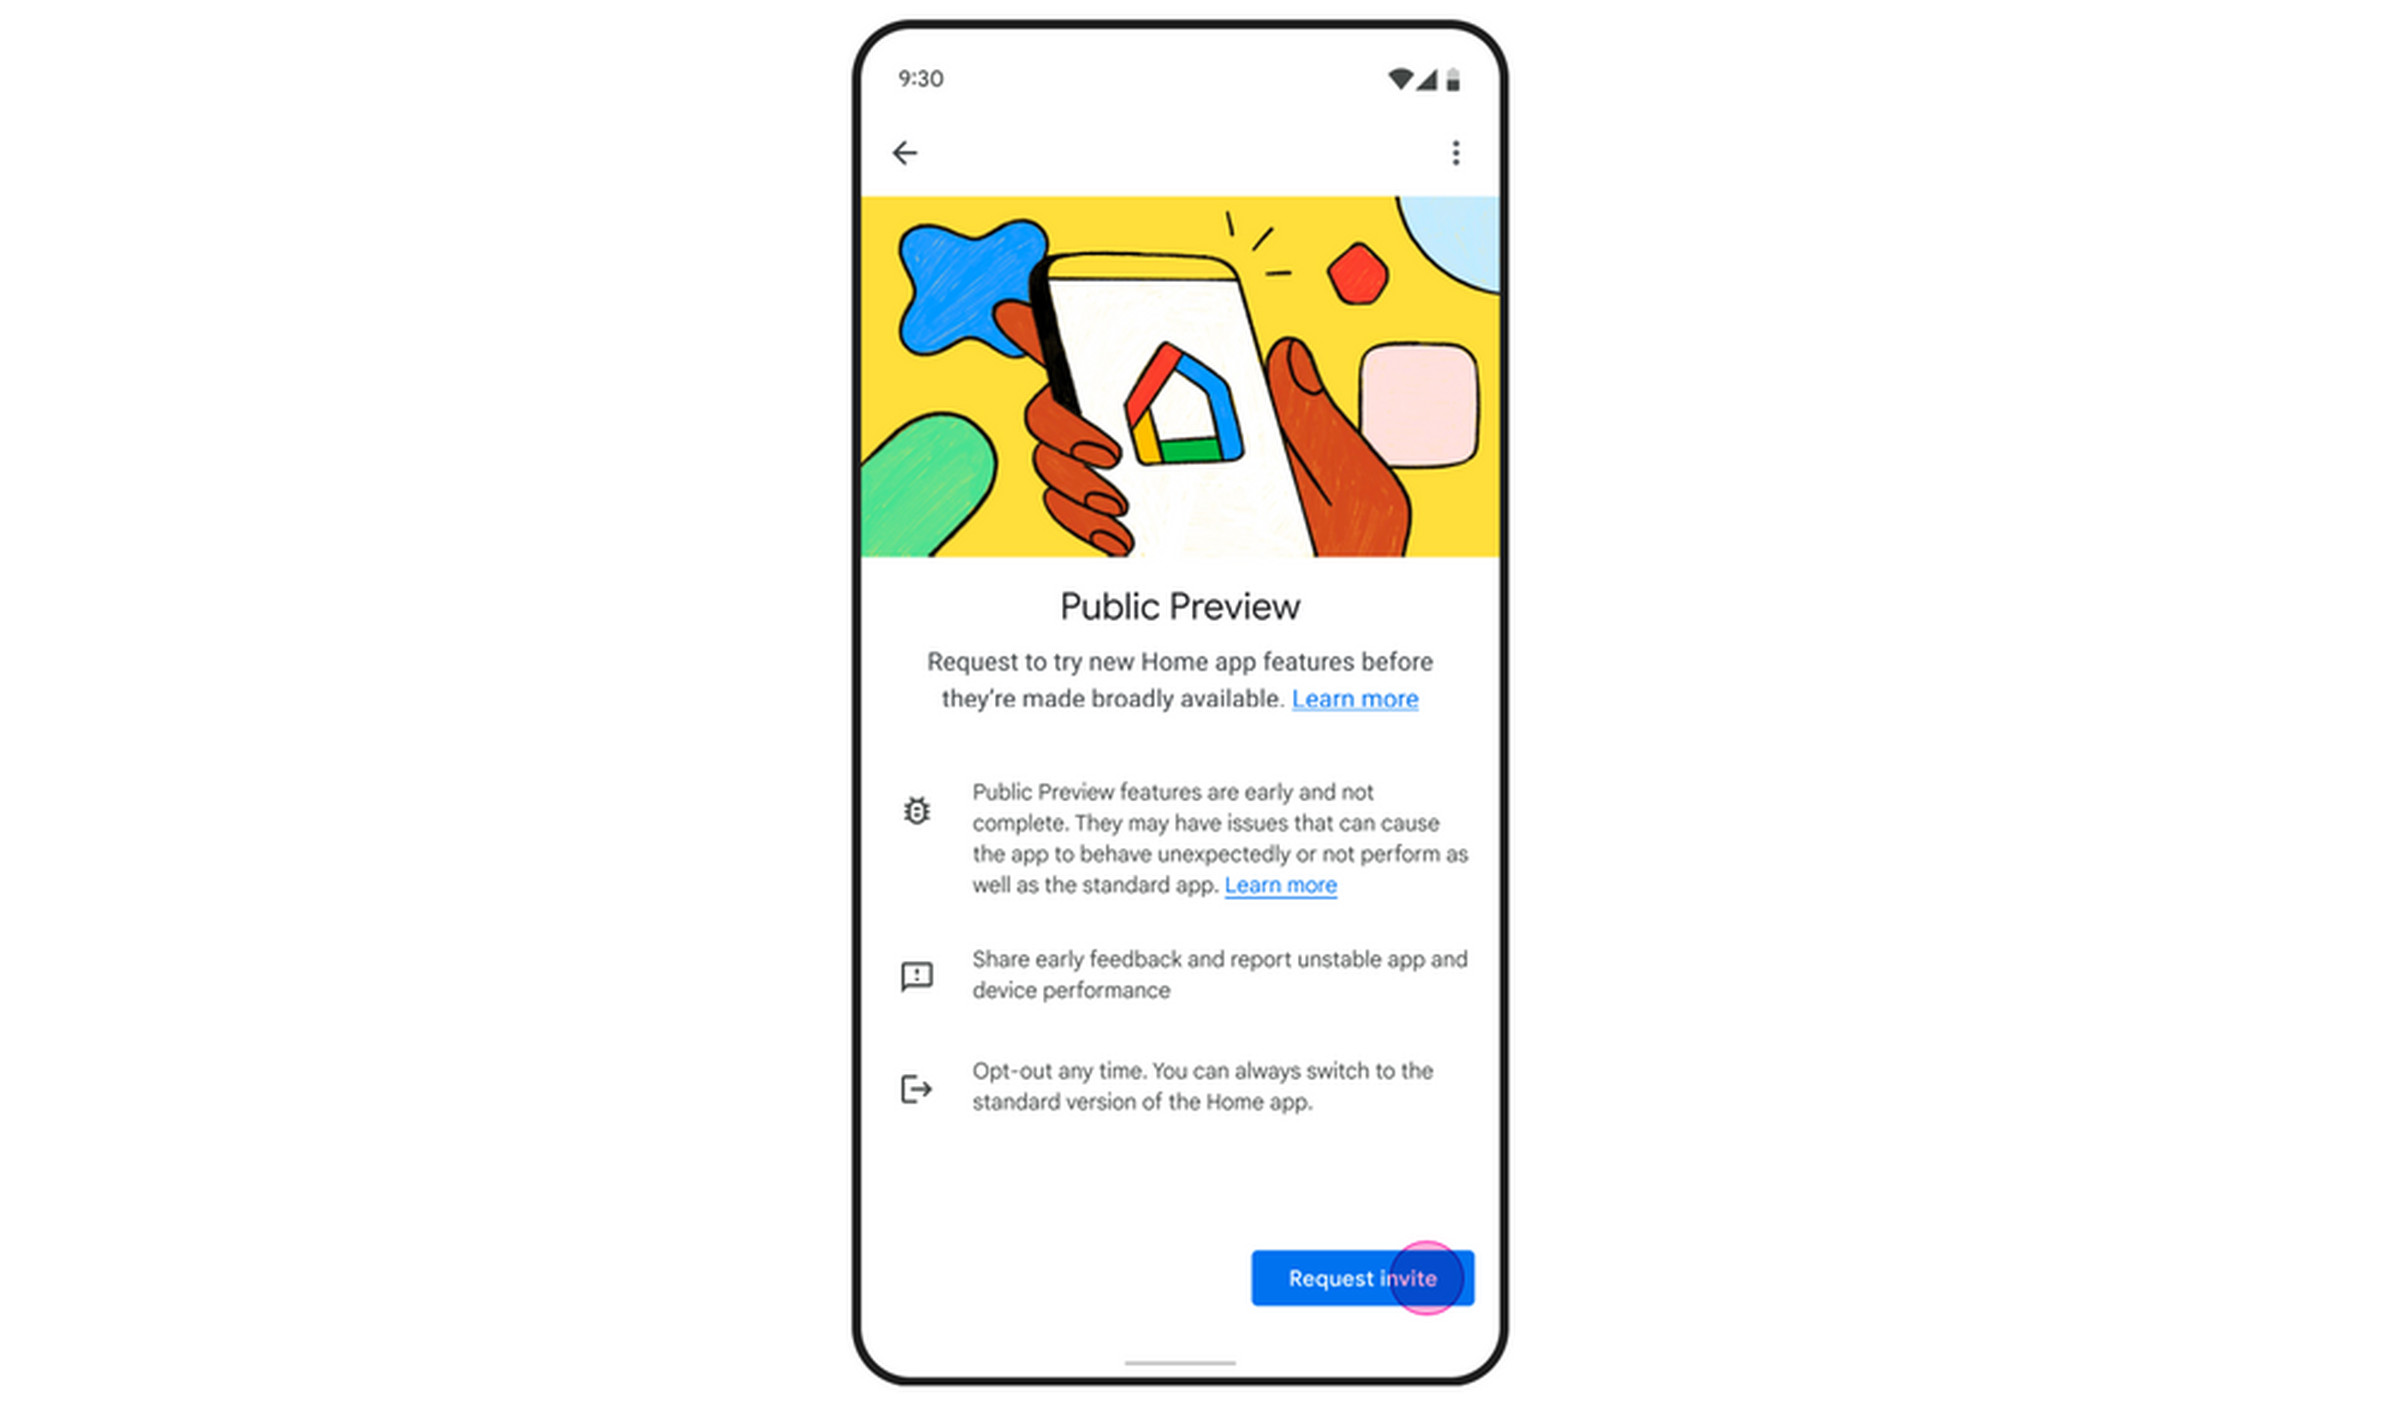 Now Google Home users can sign up to test the redesigned app